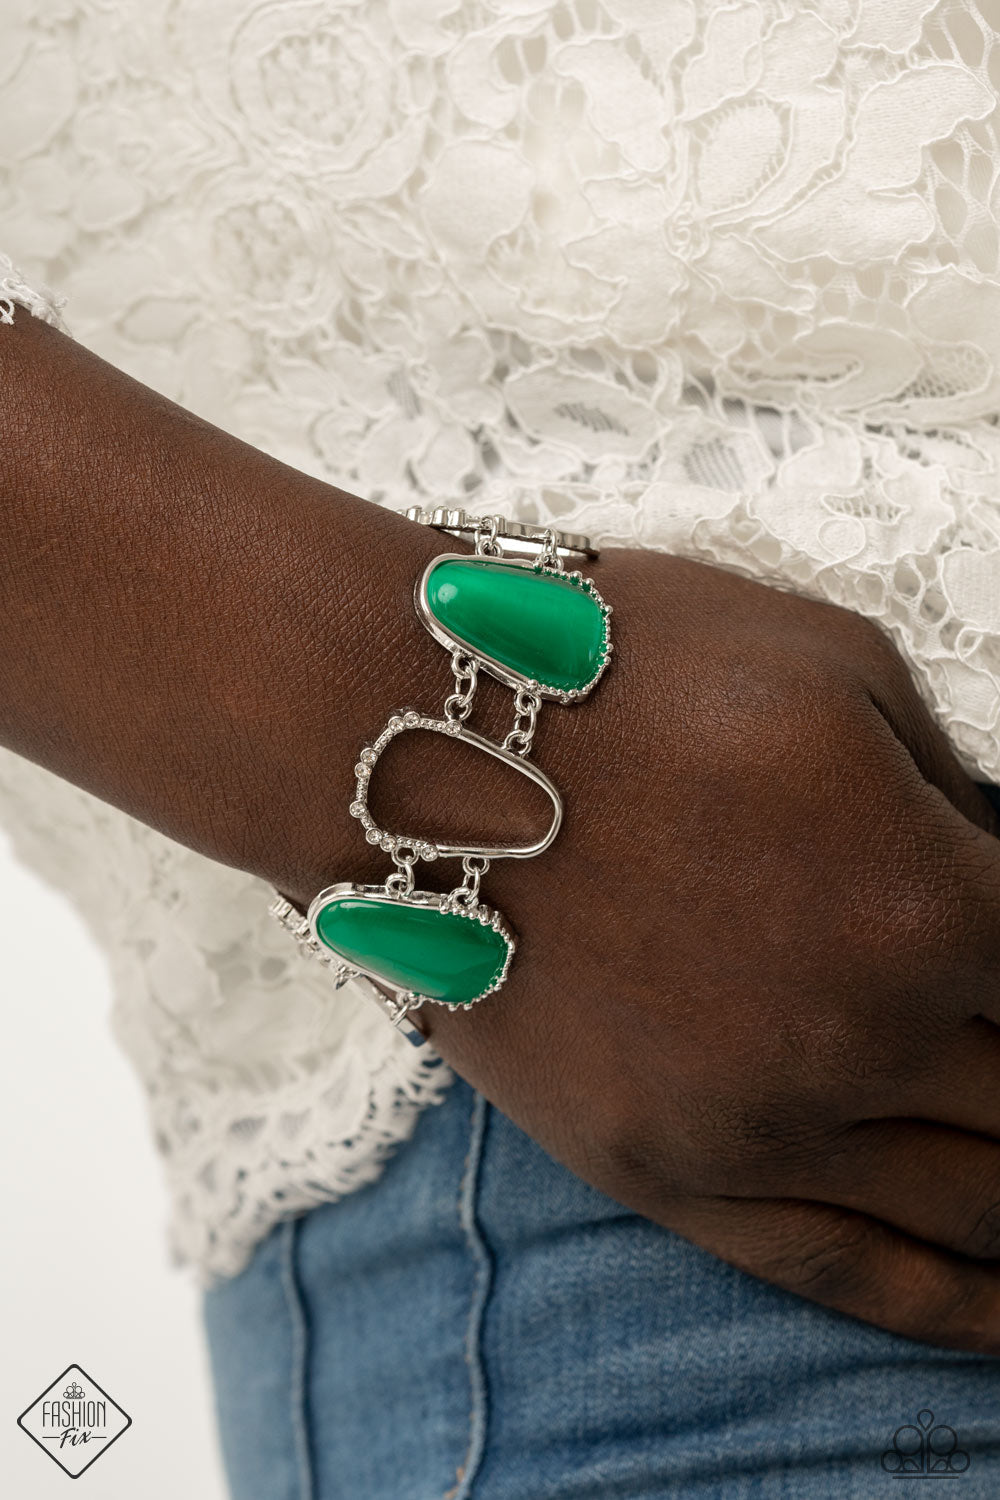 Yacht Club Couture - Green and Silver Bracelet - Paparazzi Accessories